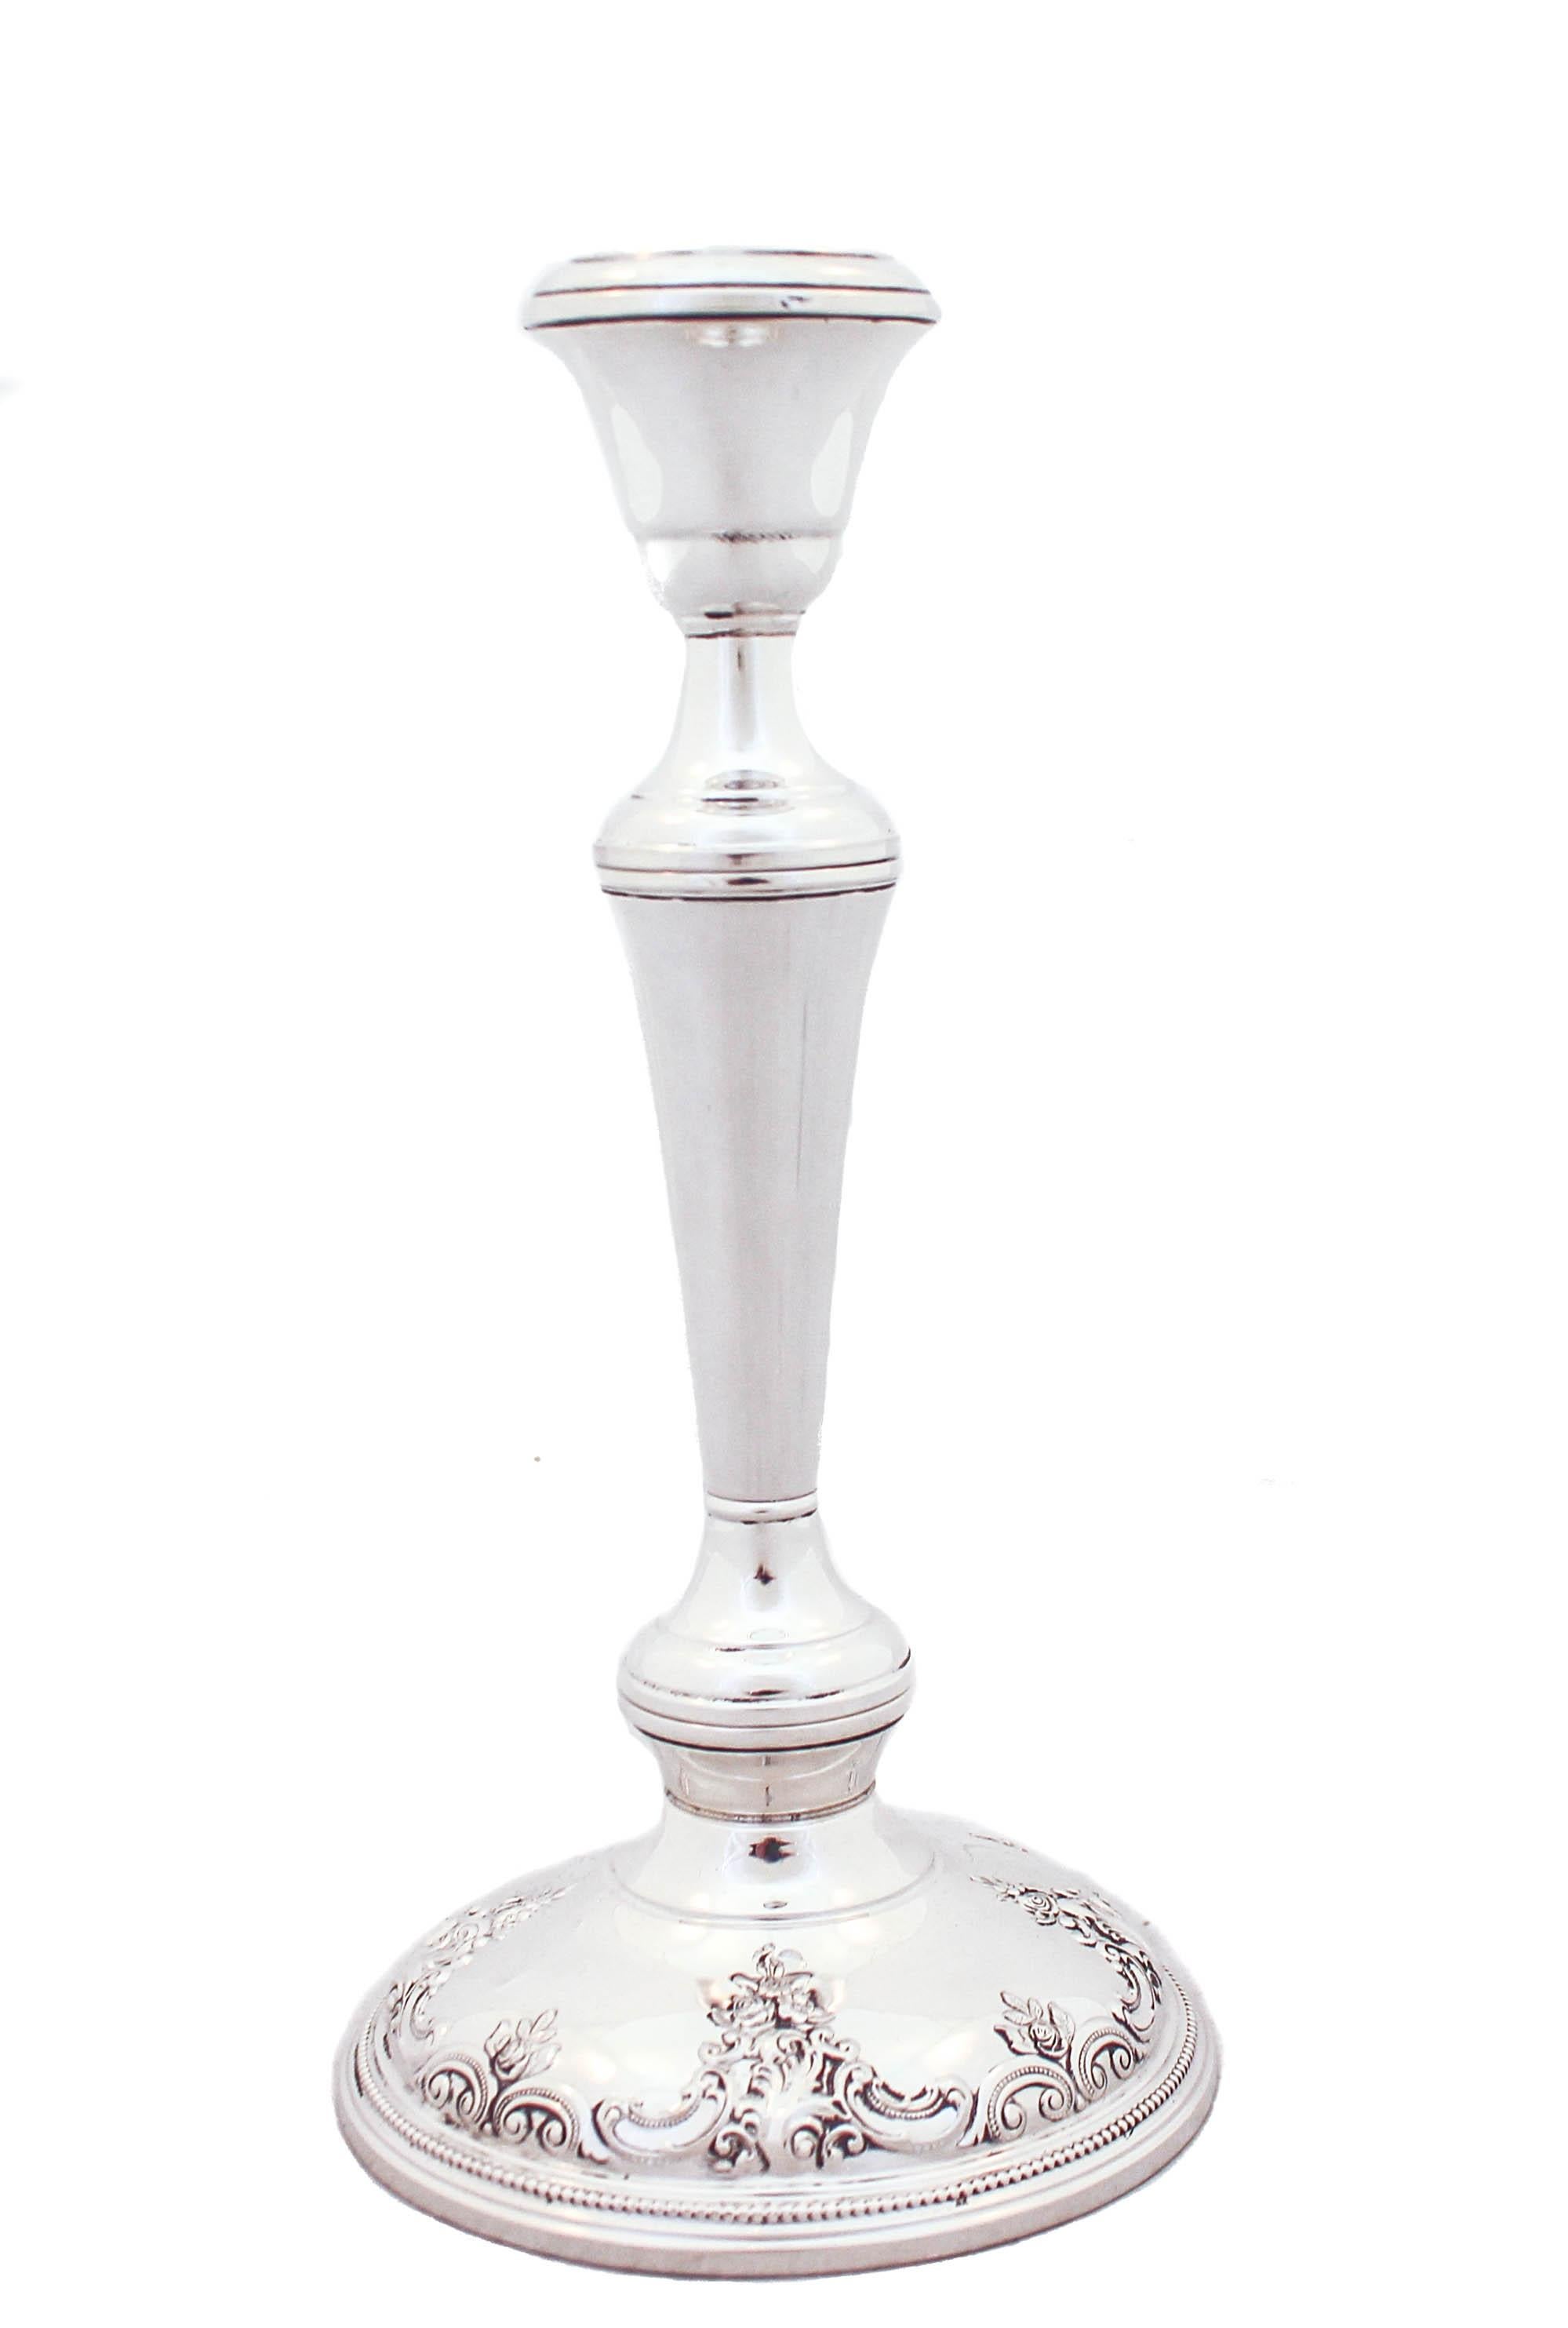 Being offered is a pair of sterling silver candlesticks in the Grande Baroque pattern by Wallace Silversmiths.  Grande Baroque is one of the most famous patterns of all time both in flatware and hollowware.  The elaborate and detailed design is rich